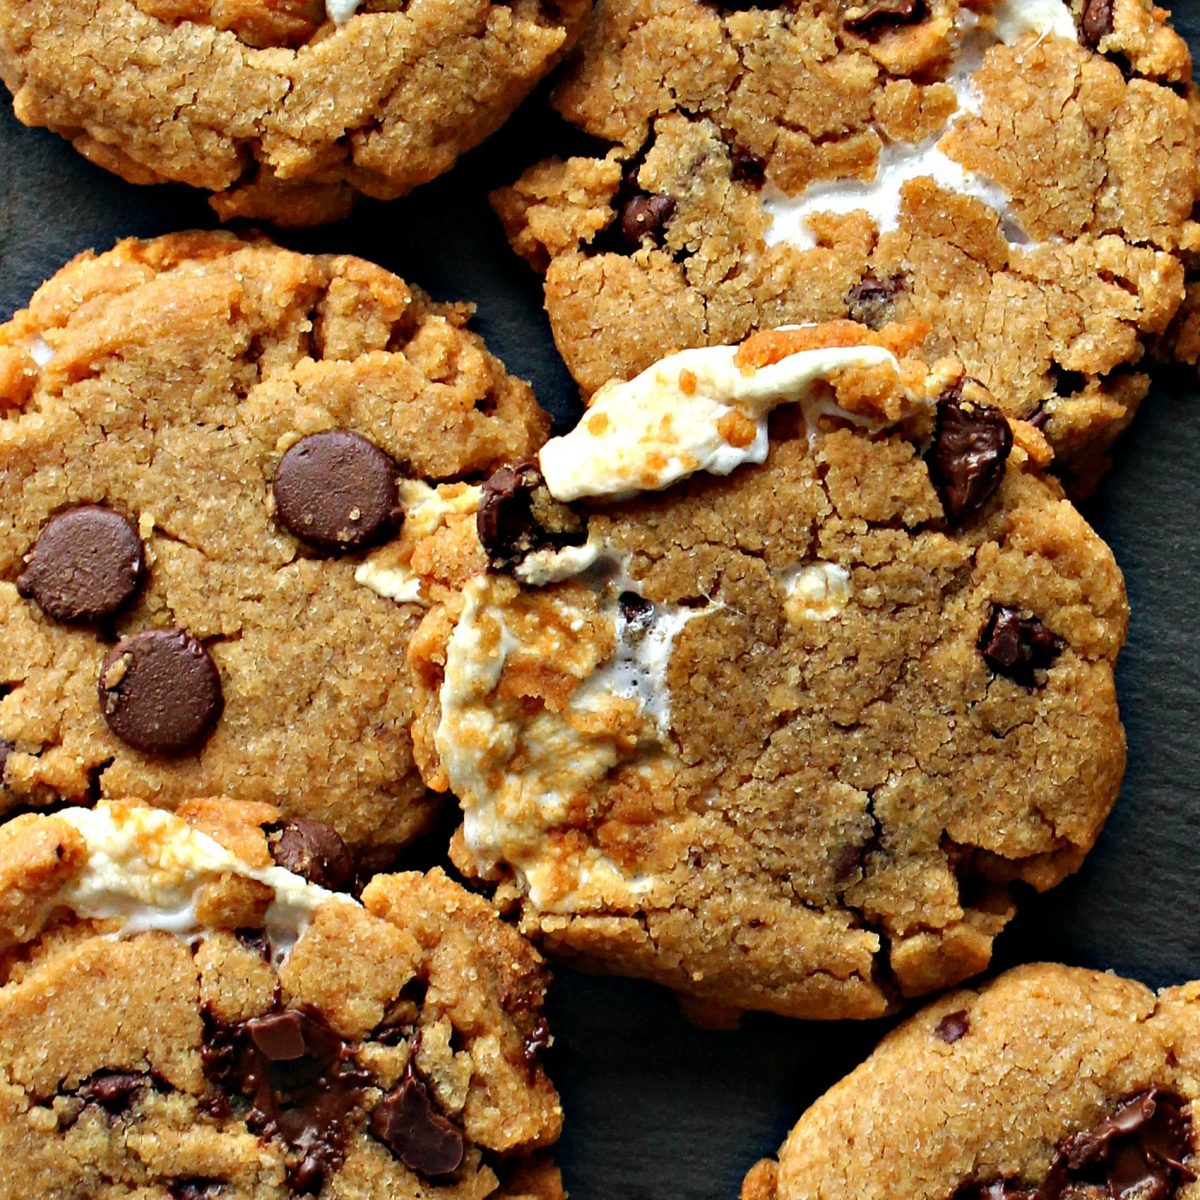  Closeup of s'mores cookies showing peanut butter dough, chocolate chips, and melted marshmallow.